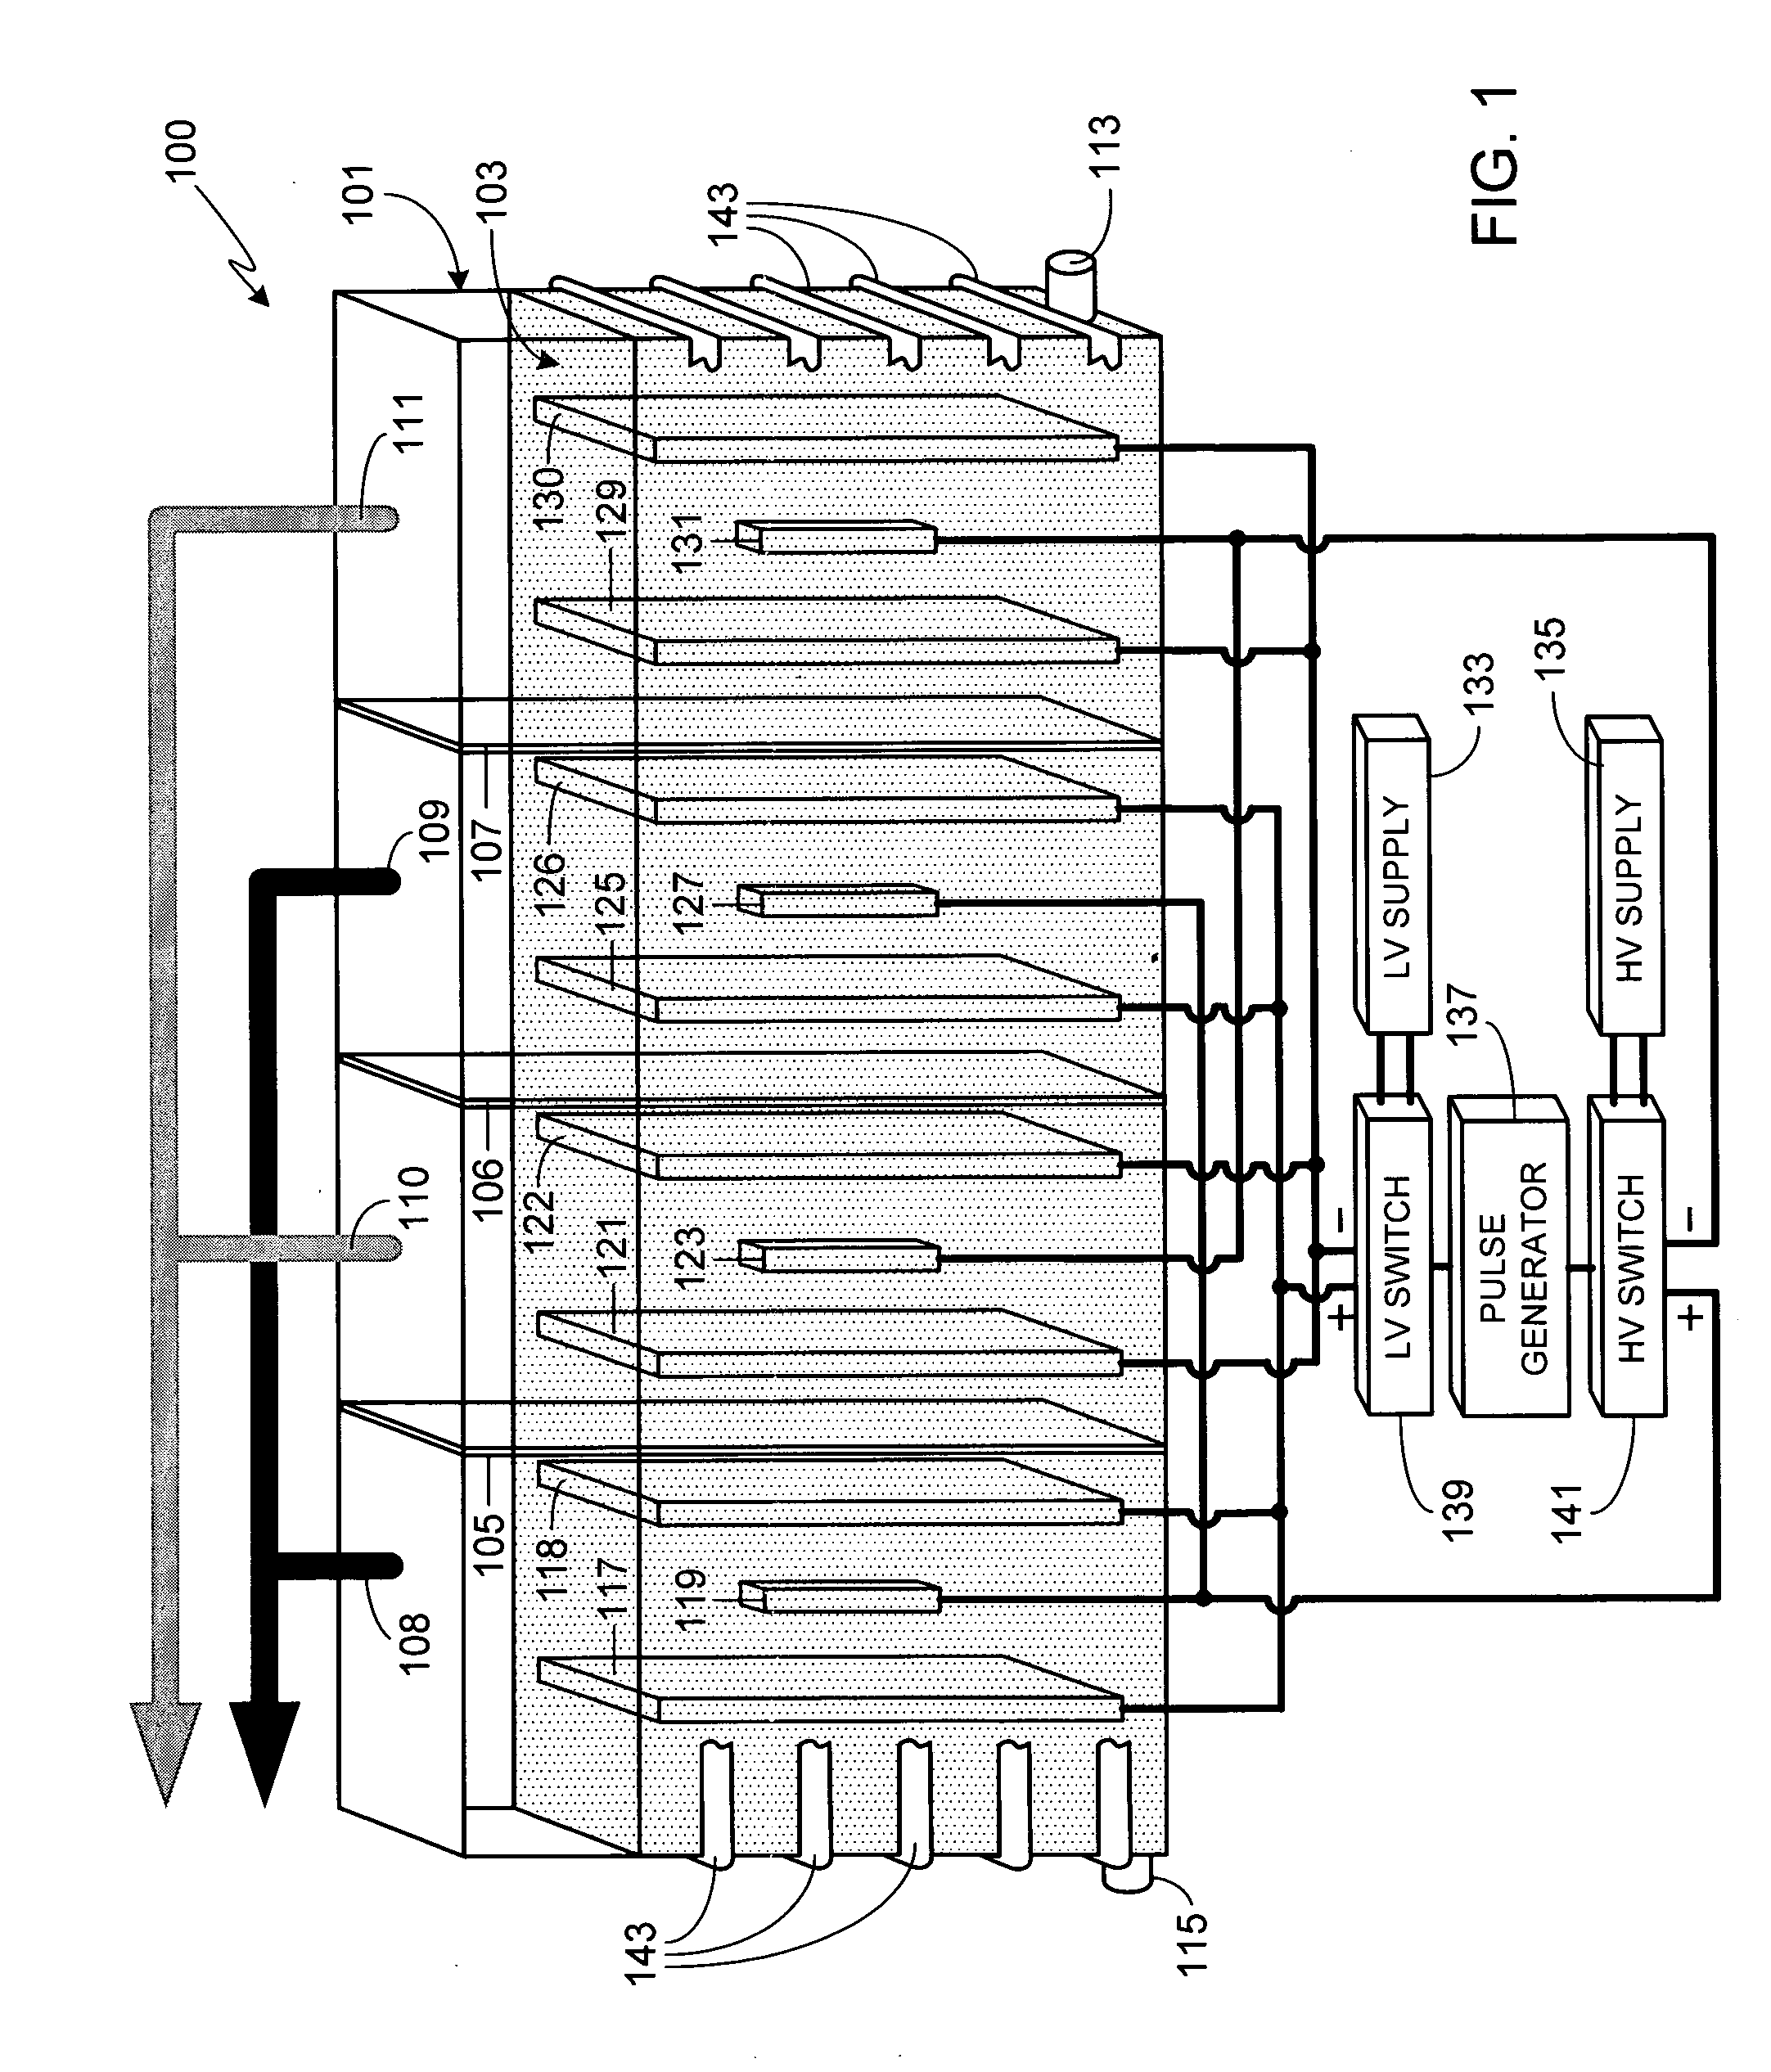 Multi-cell dual voltage electrolysis apparatus and method of using same